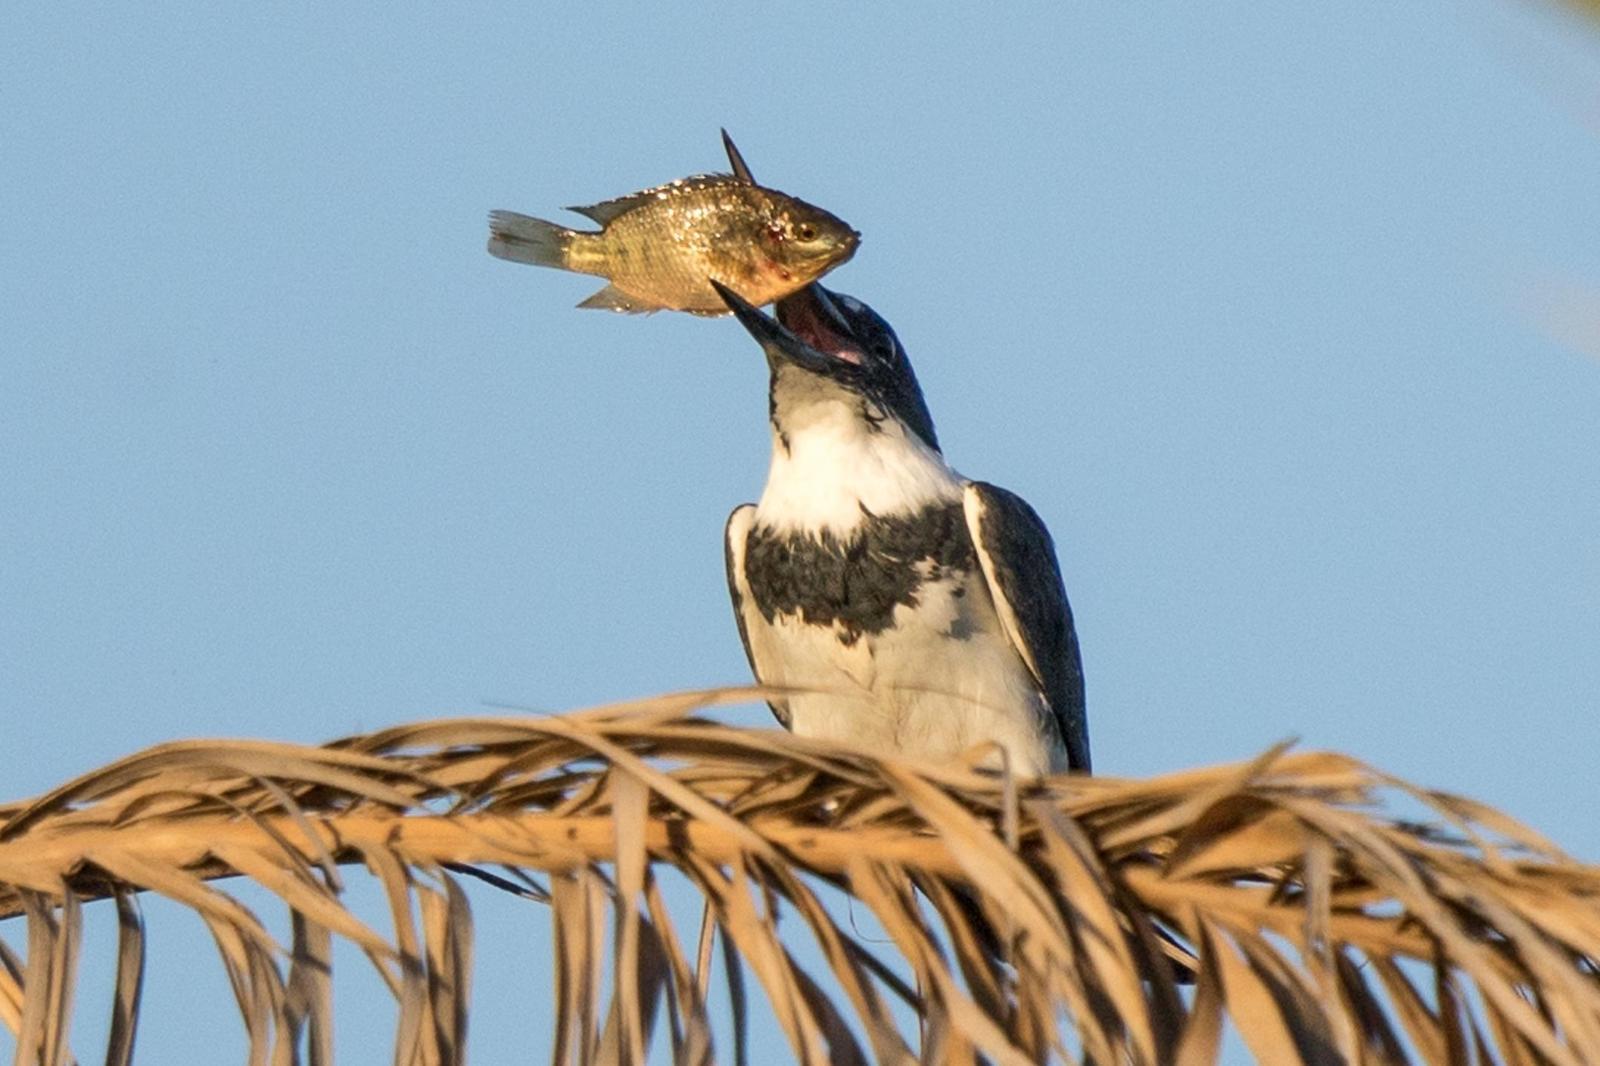 Belted Kingfisher Photo by Morgan Edwards